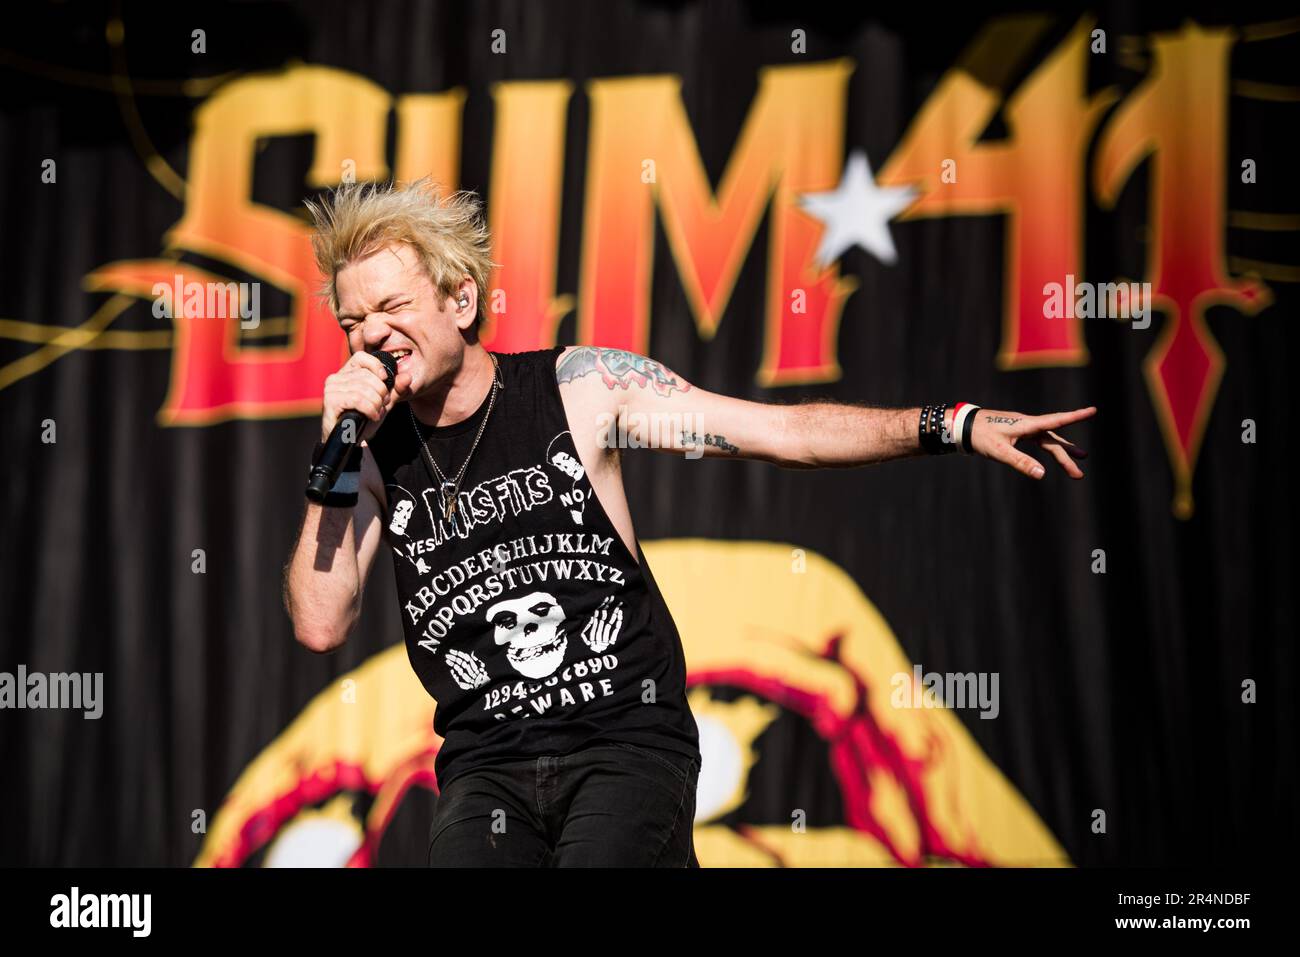 FLORENCE, ITALY, FIRENZE ROCKS FESTIVAL: Deryck Whibley, singer and founder of the Canadian punk rock band SUM41, performing live on stage at the Firenze Rocks festival Stock Photo